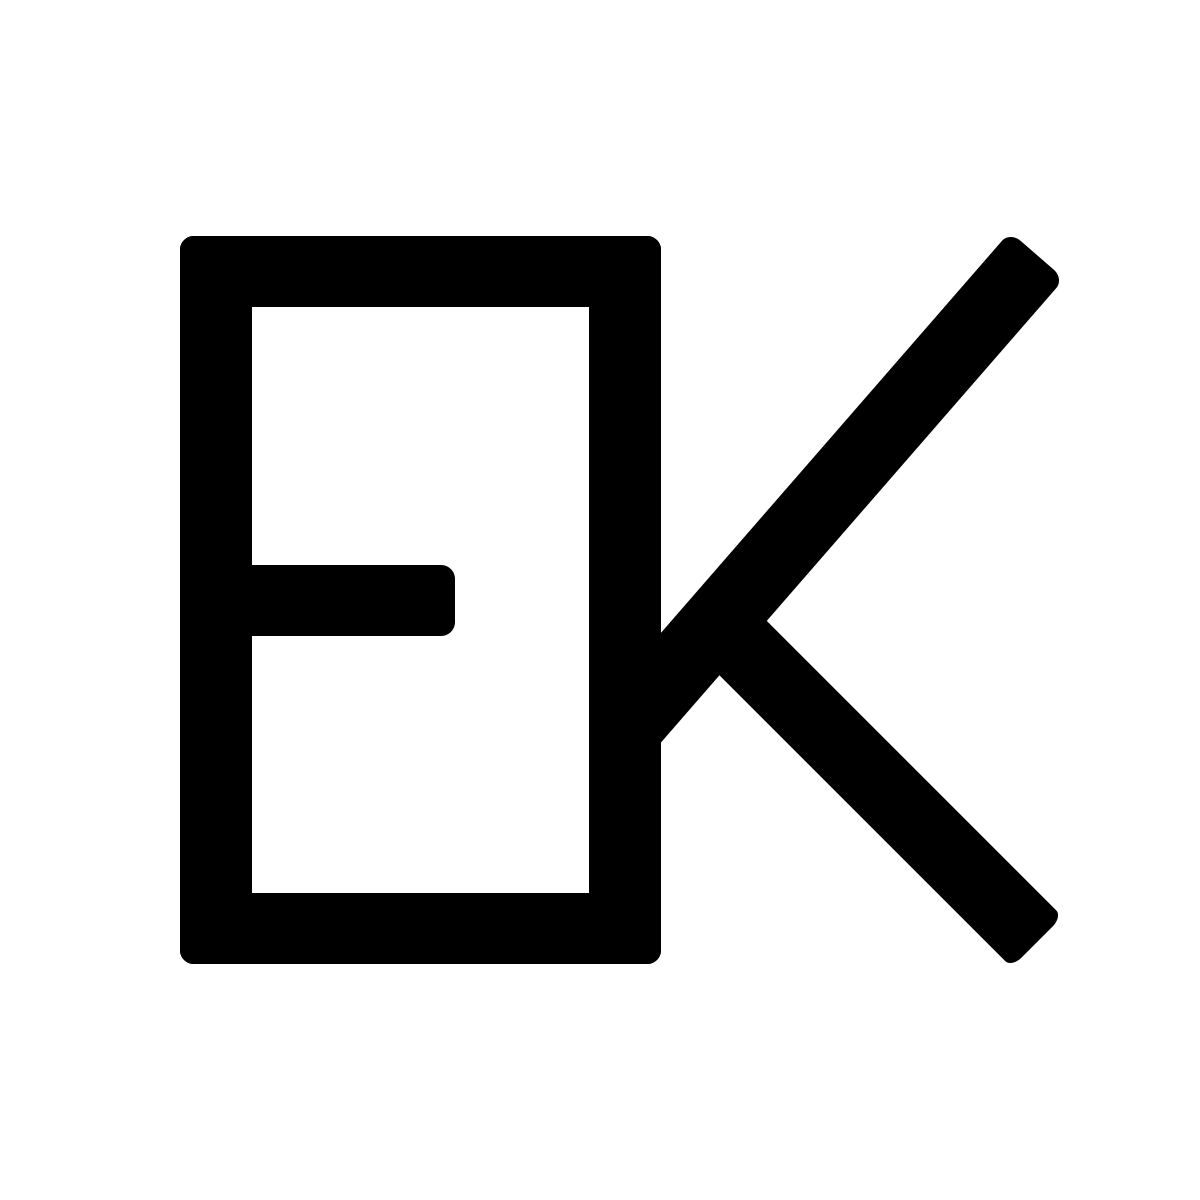 Logo showing letters E and K.